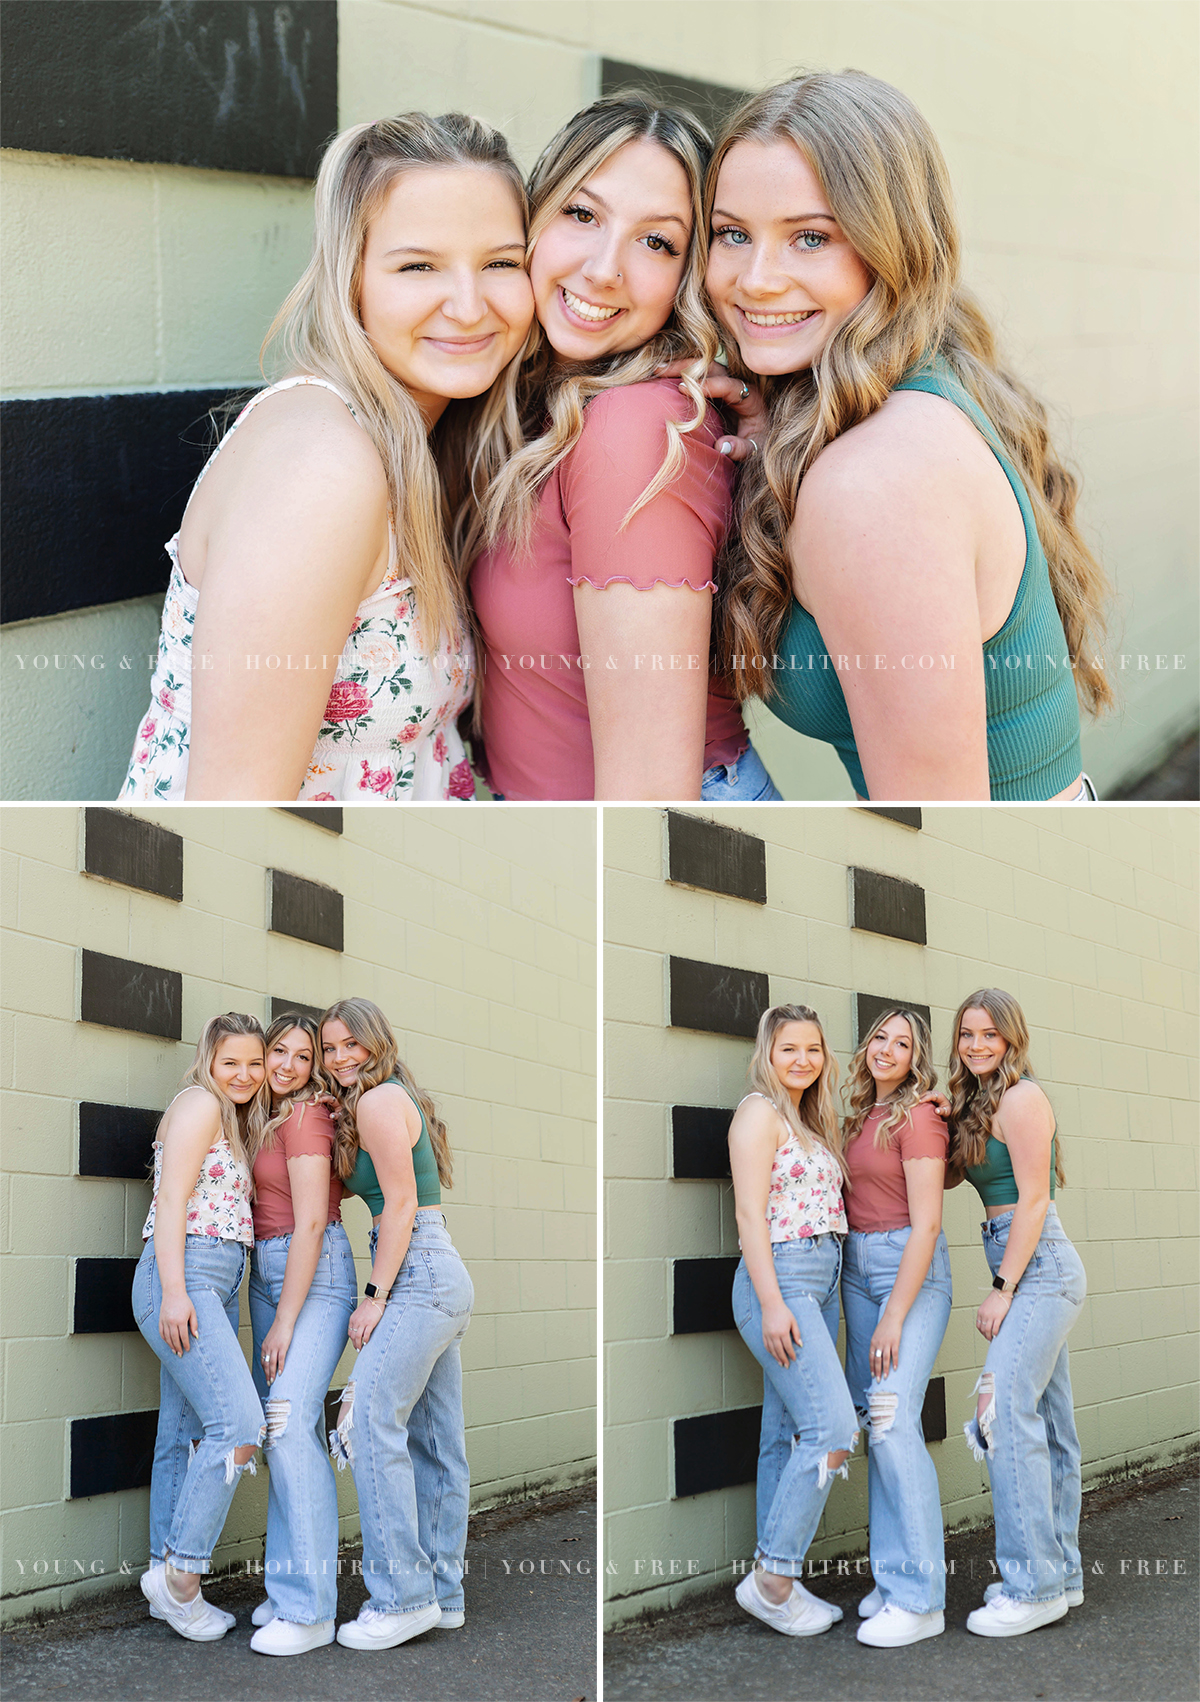 Three best friends fun senior session in Downtown Eugene by Holli True Photography